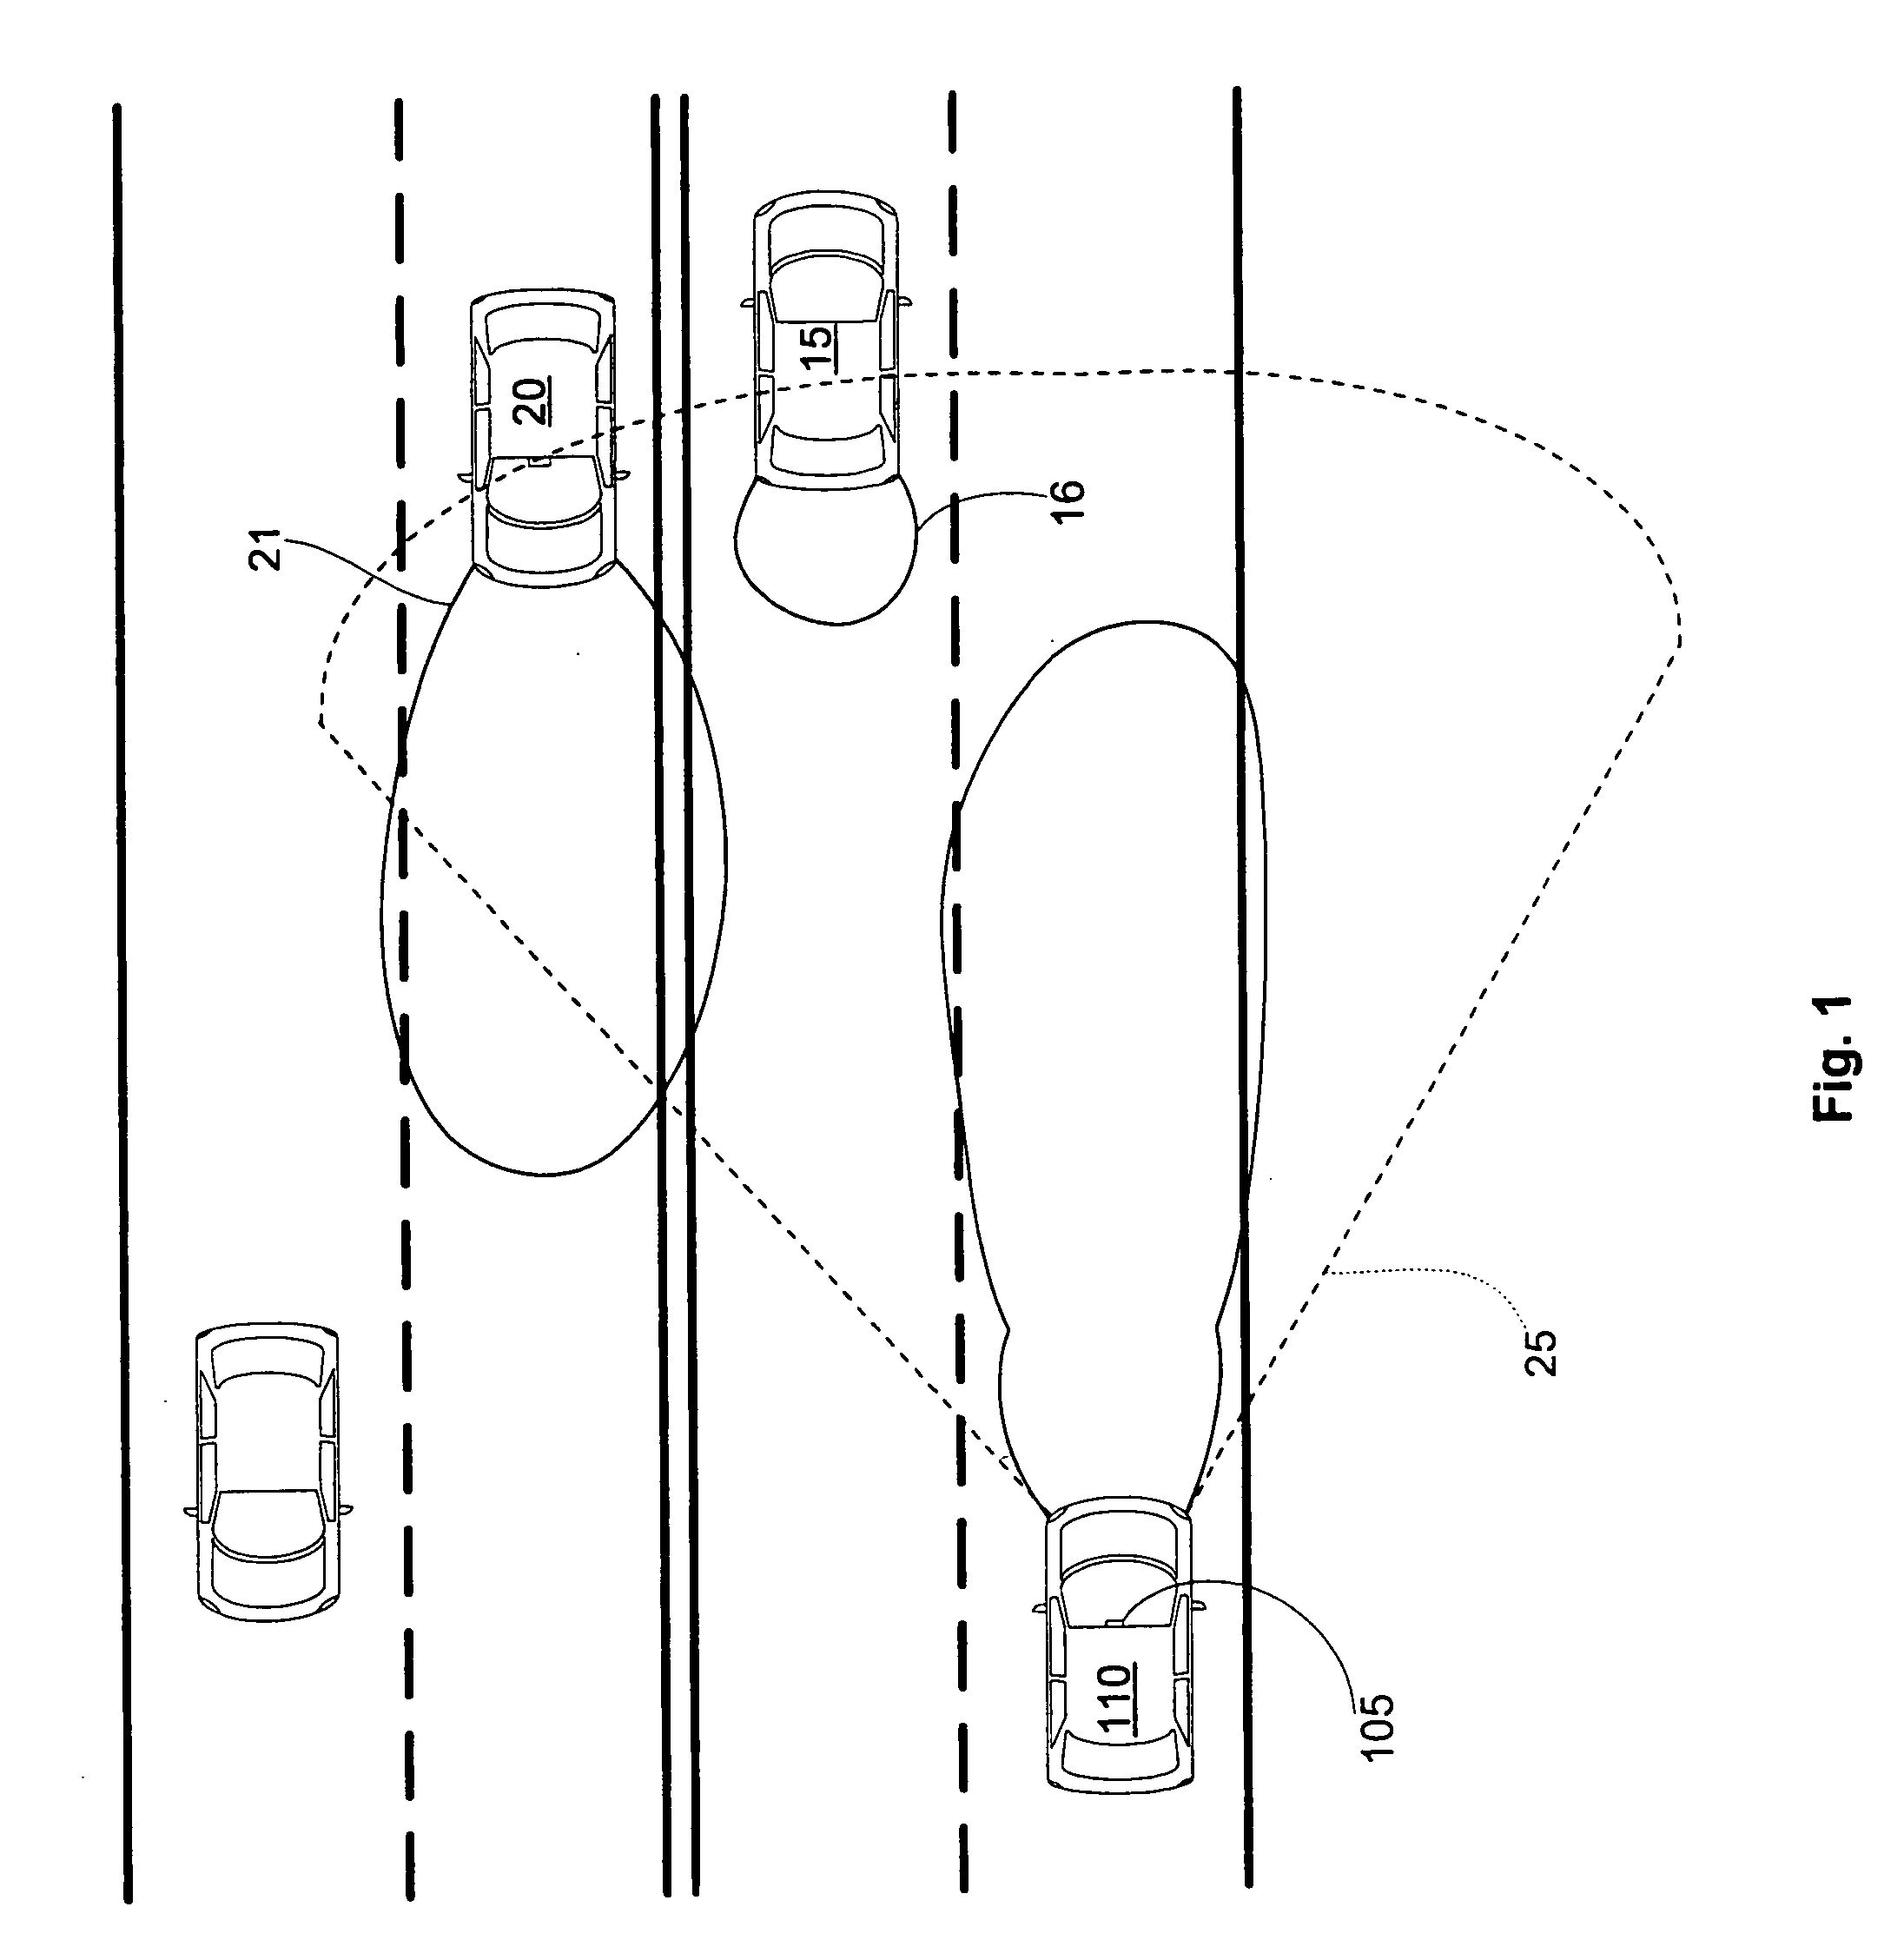 Light source detection and categorization system for automatic vehicle exterior light control and method of manufacturing